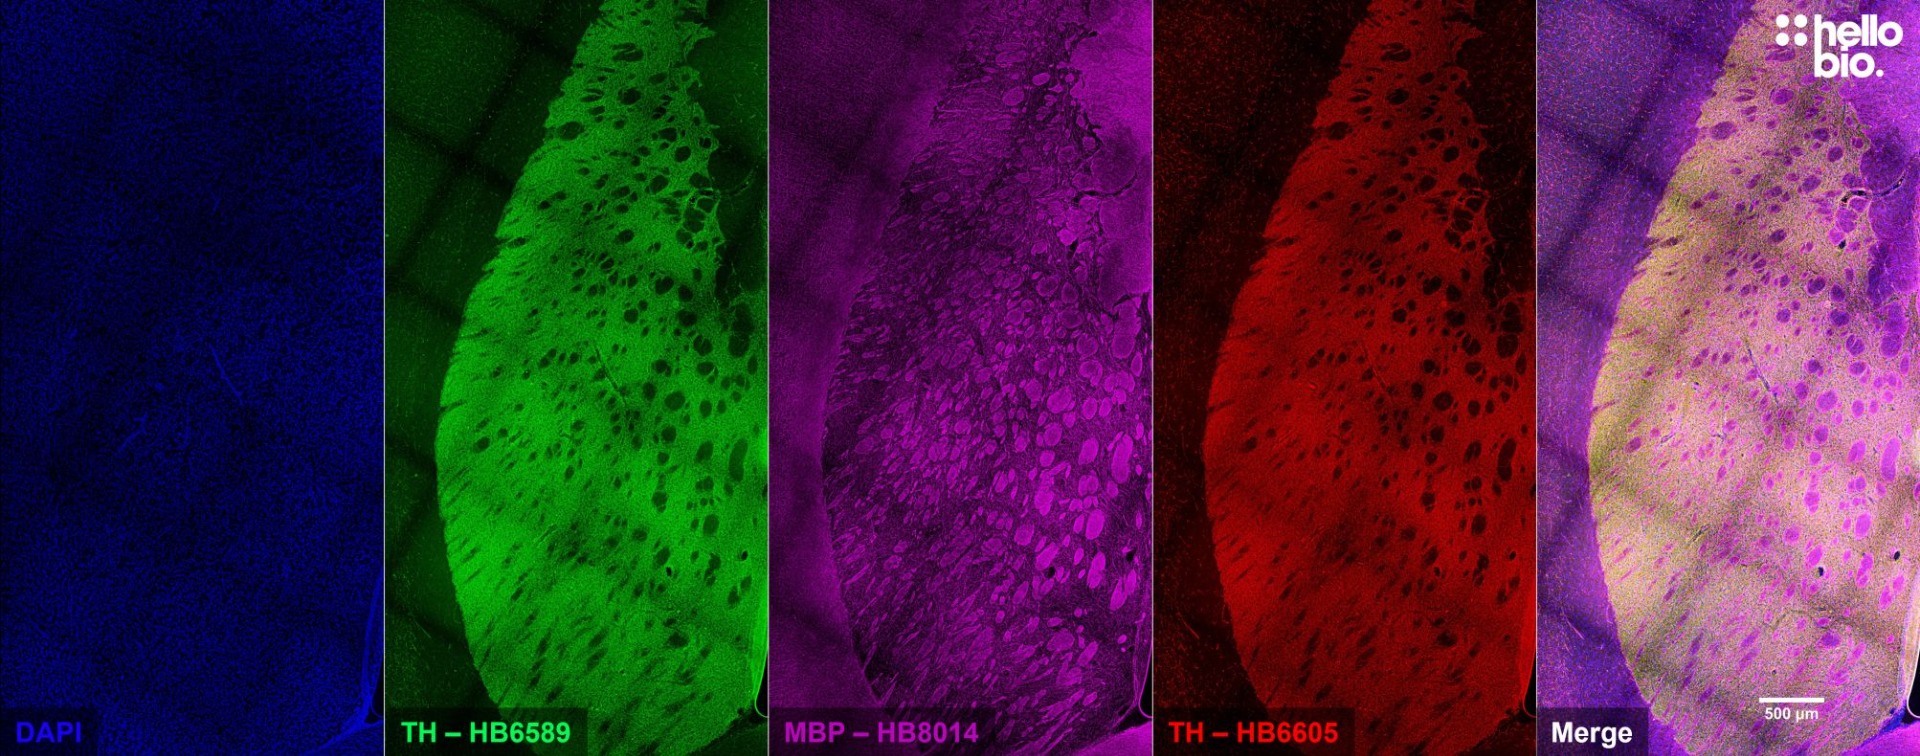 Figure 4. Independent antibody validation of HB6589 and HB6605 in rat CPu.